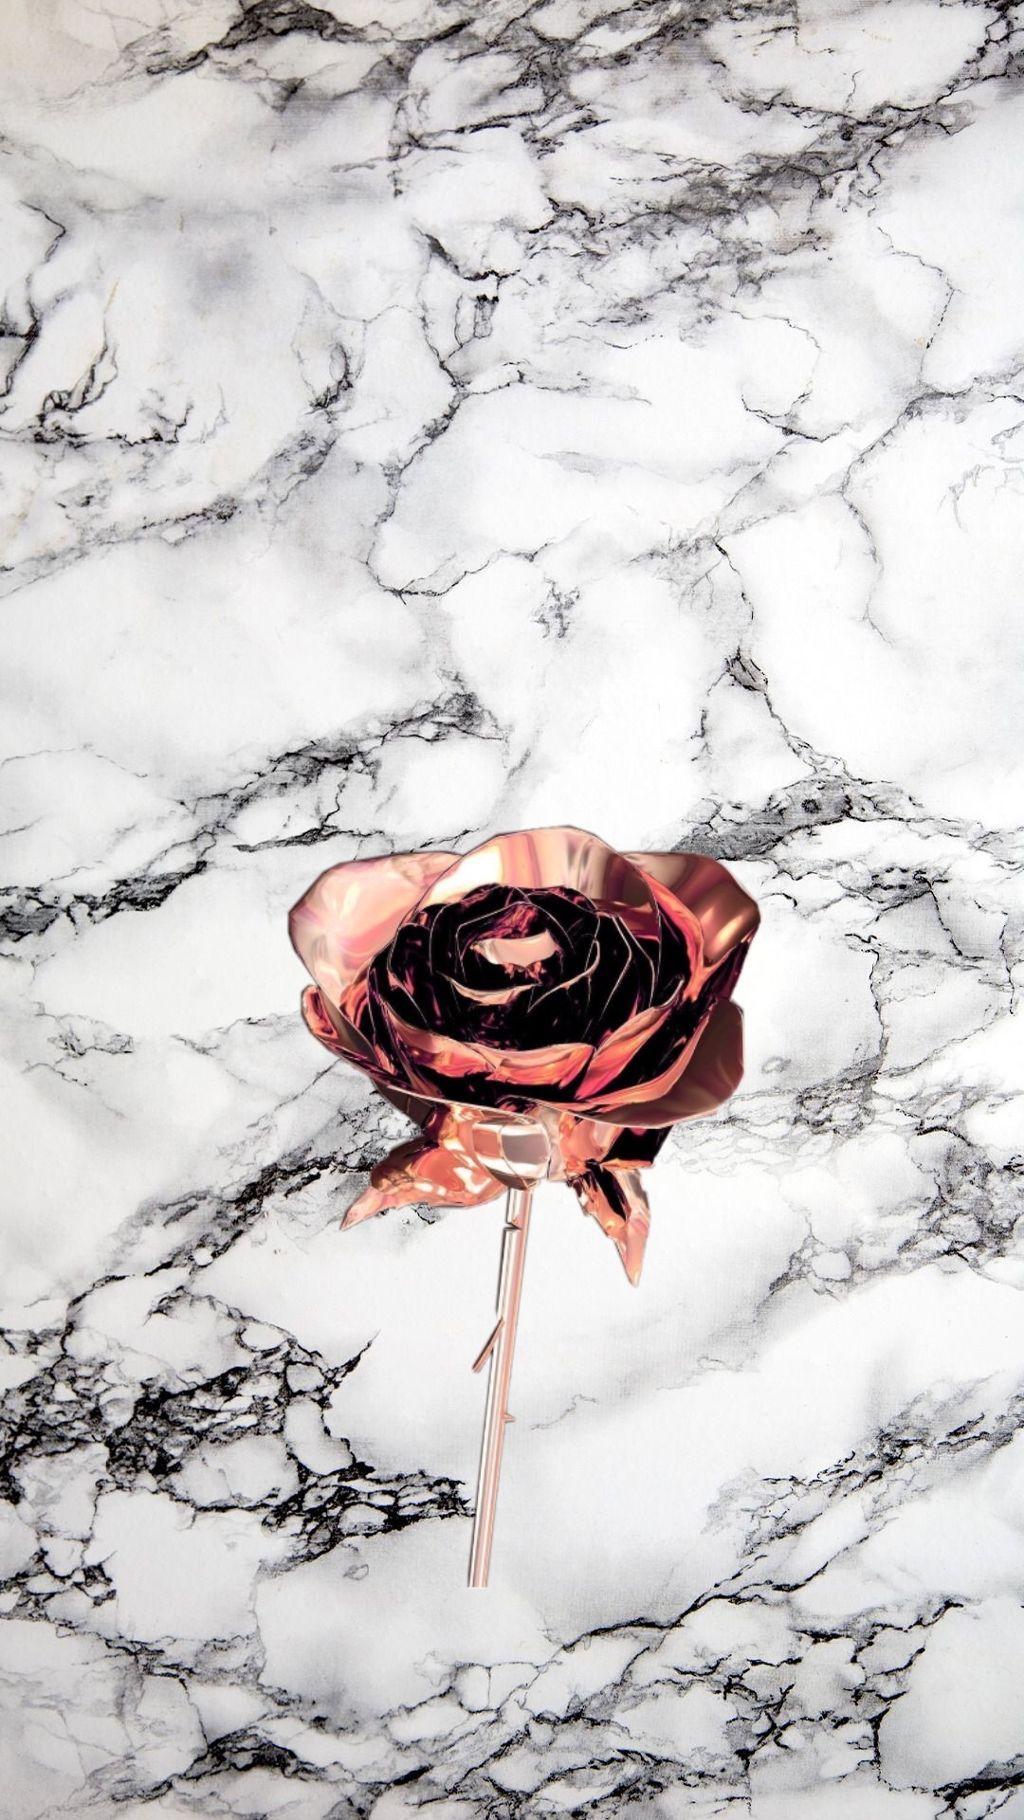 Rose Gold Aesthetic Wallpapers Top Free Rose Gold Aesthetic Backgrounds Wallpaperaccess Rose gold iphone background tumblr beautiful iphone wallpaper tumblr. rose gold aesthetic wallpapers top